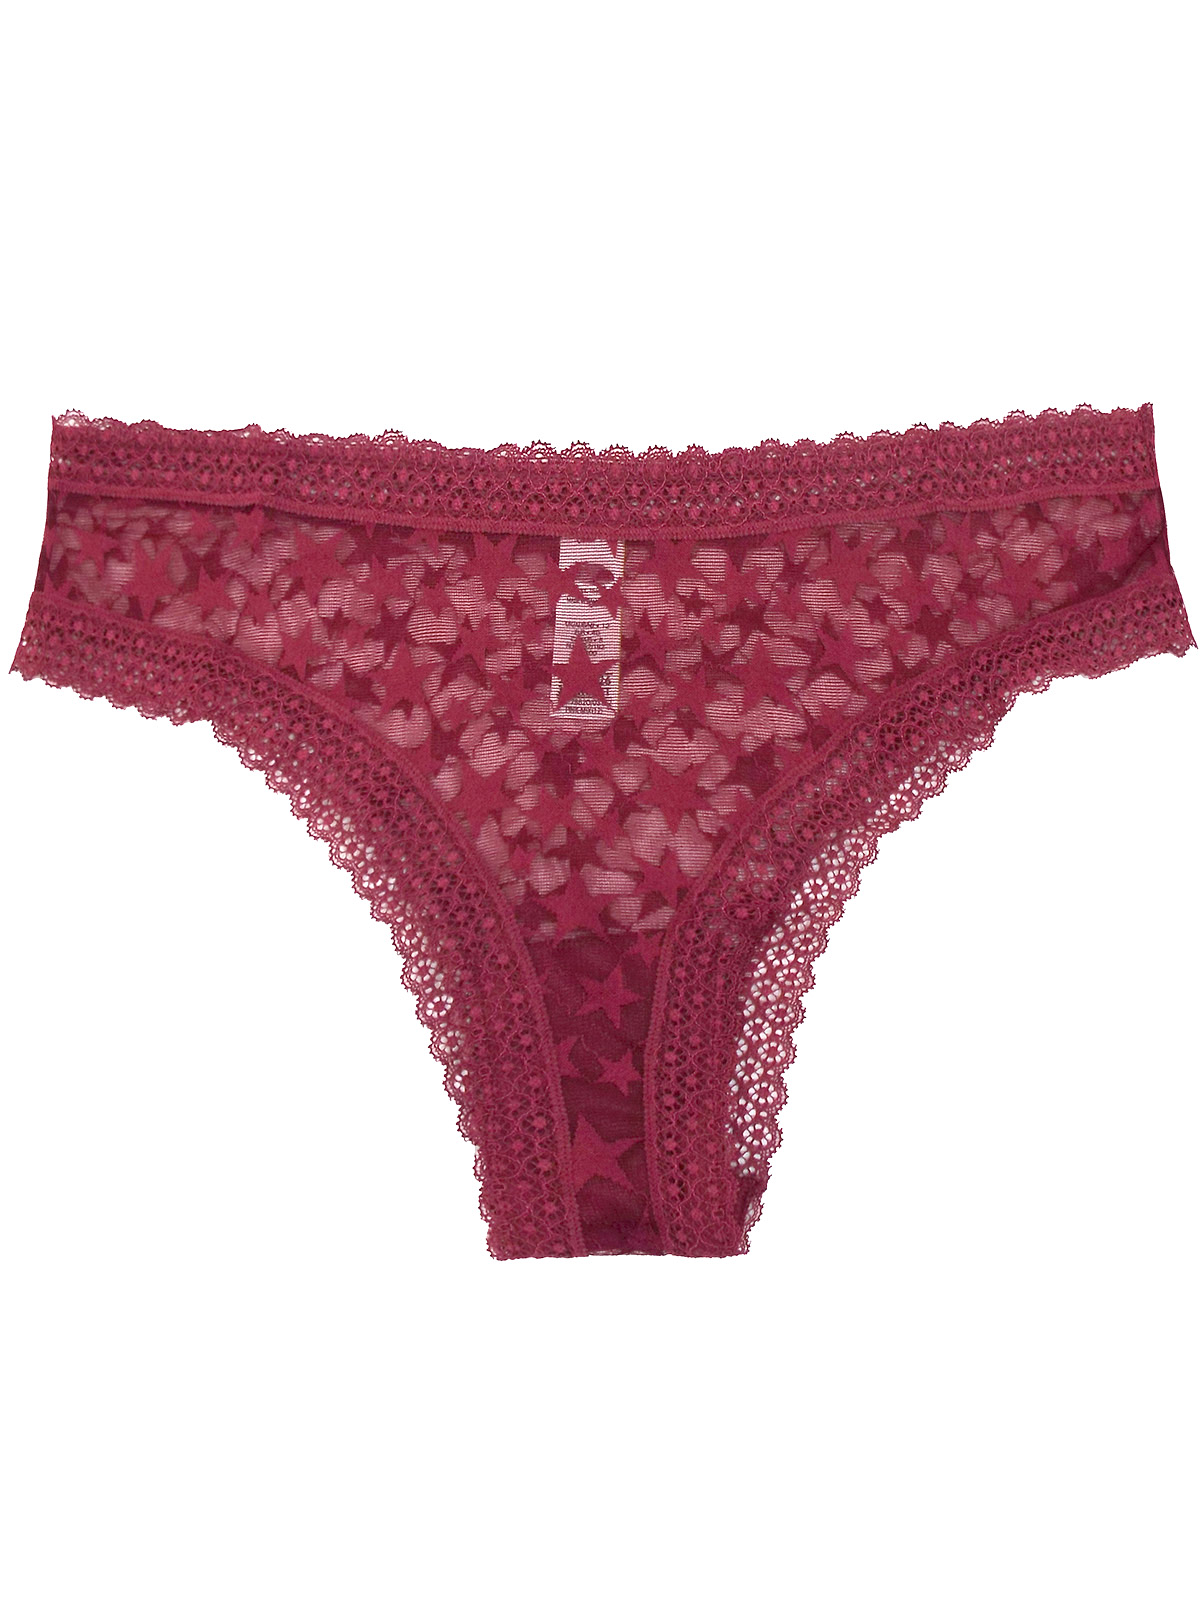 Marks and Spencer - - M&5 BURGUNDY All Over Lace Mini Knickers - Size 6 ...